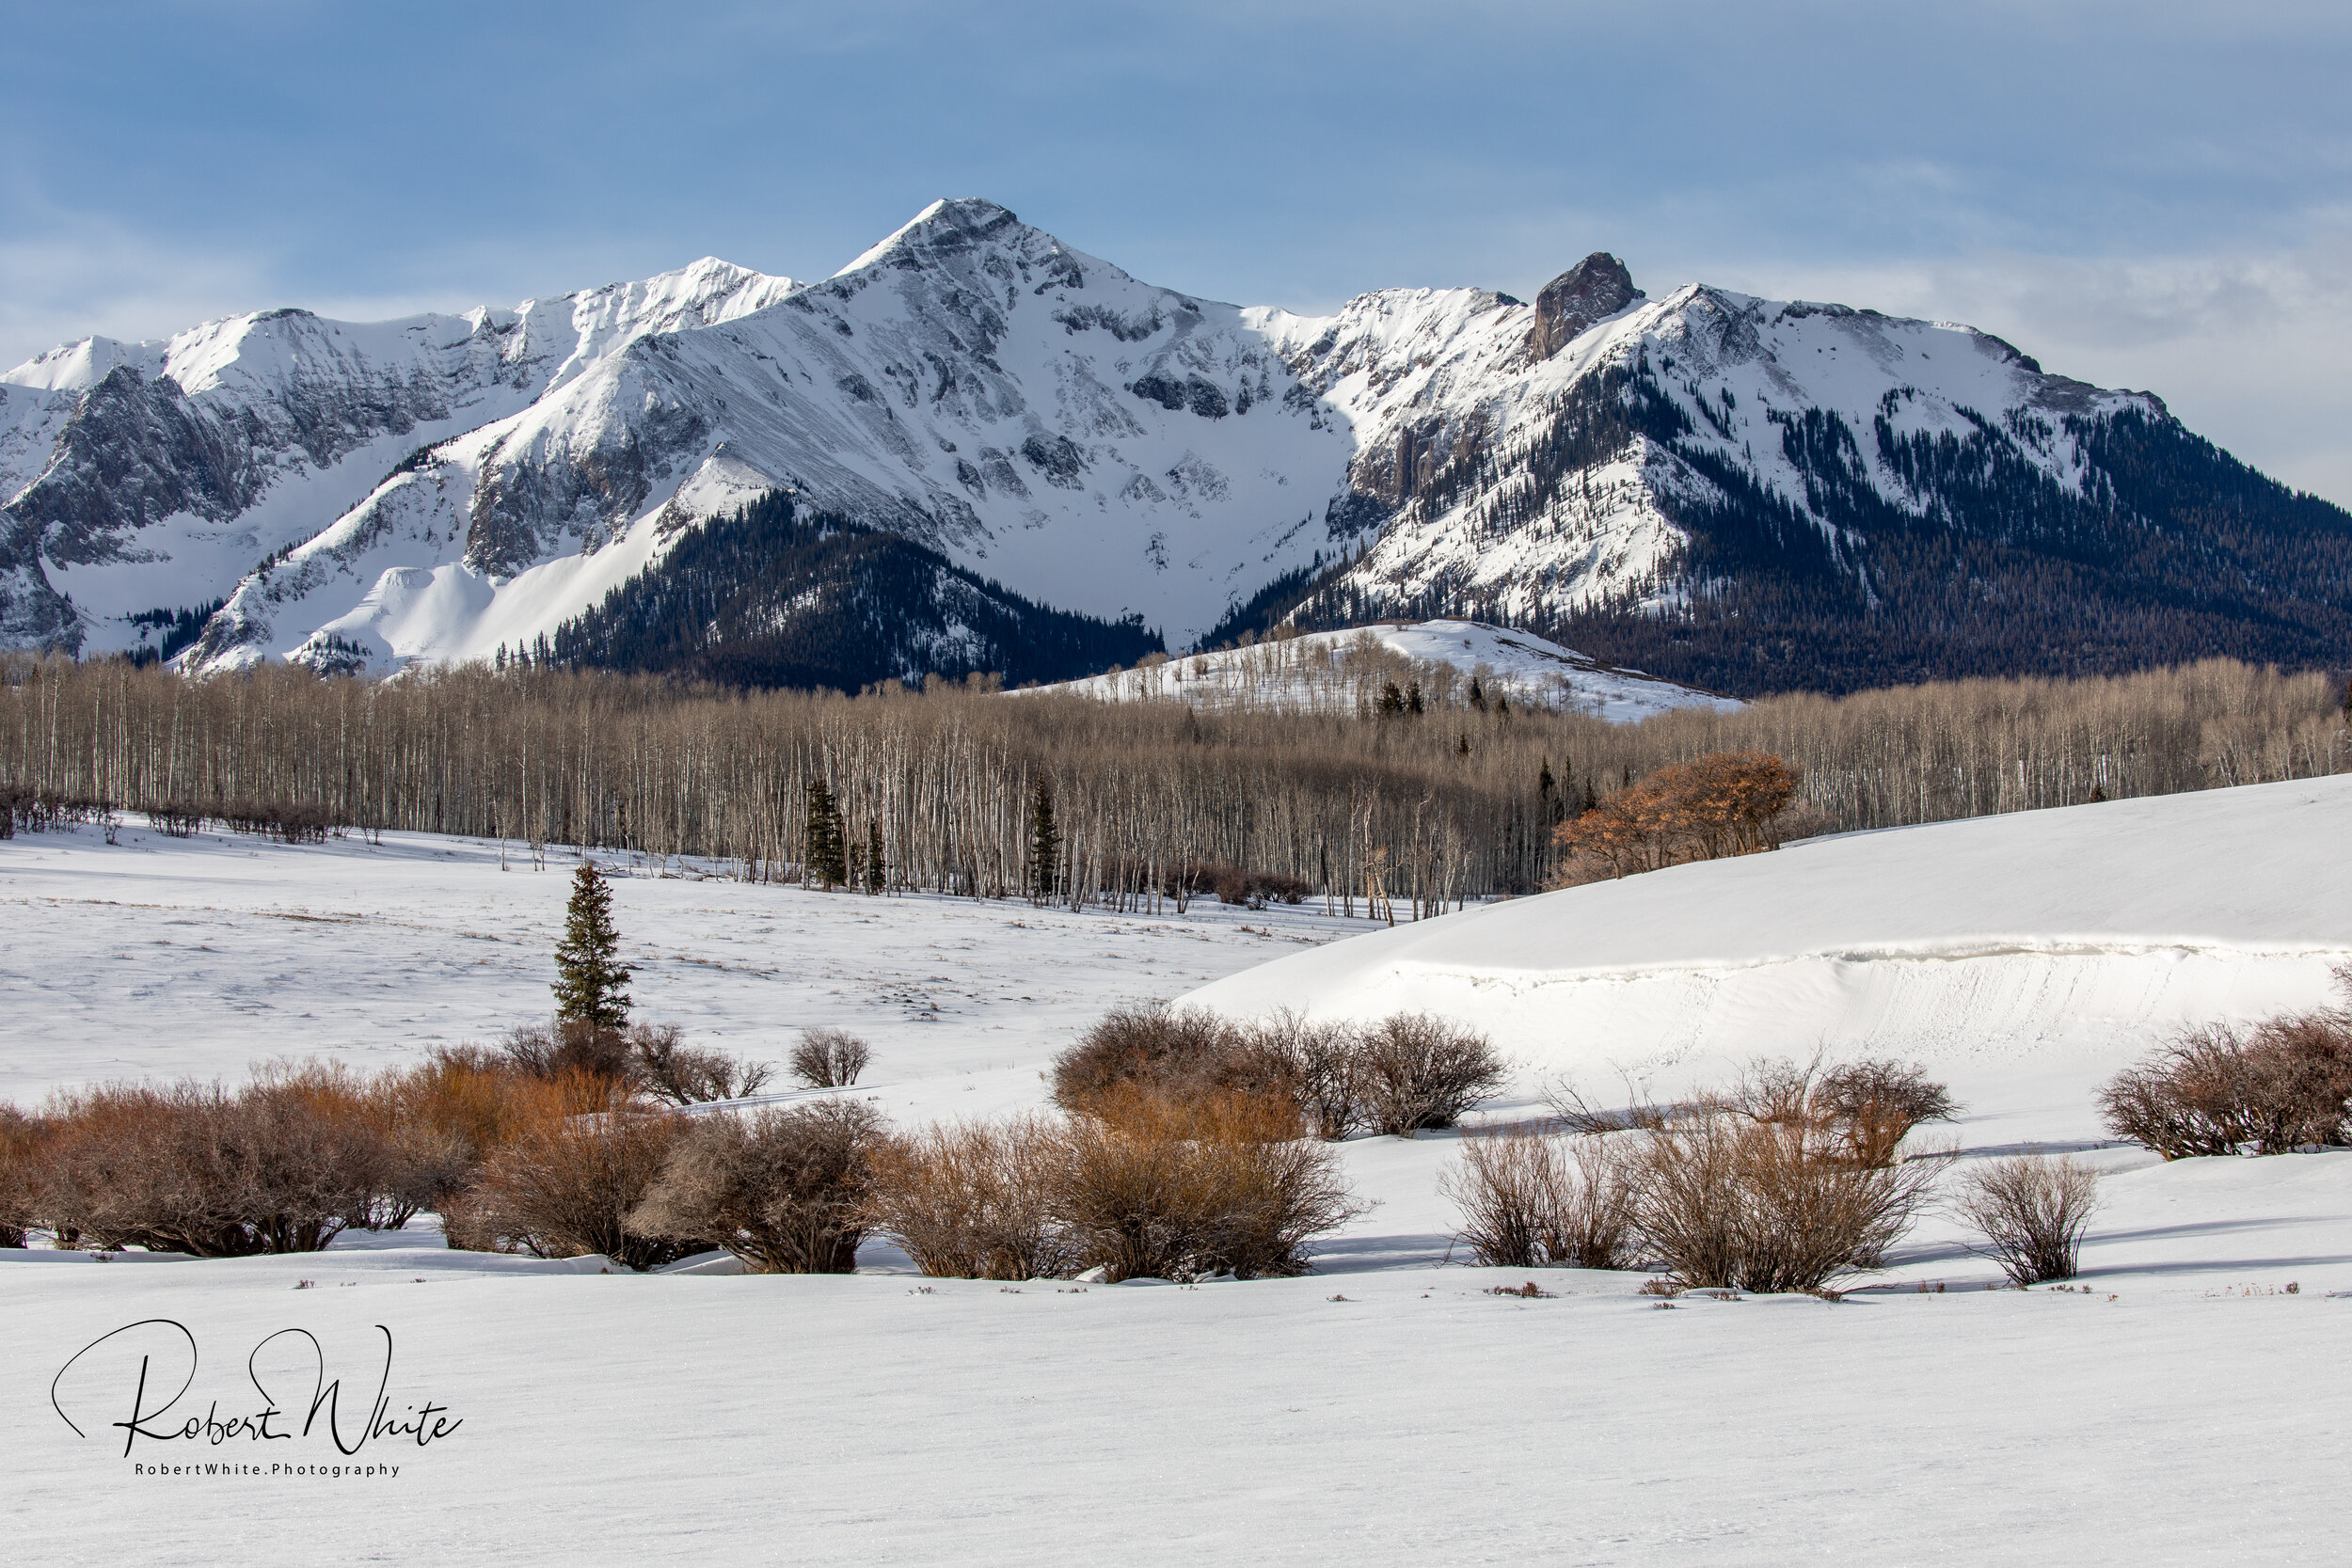  Beautiful ranch land just north of the San Juan mountains and west of Ridgway Colorado off highway 62. 